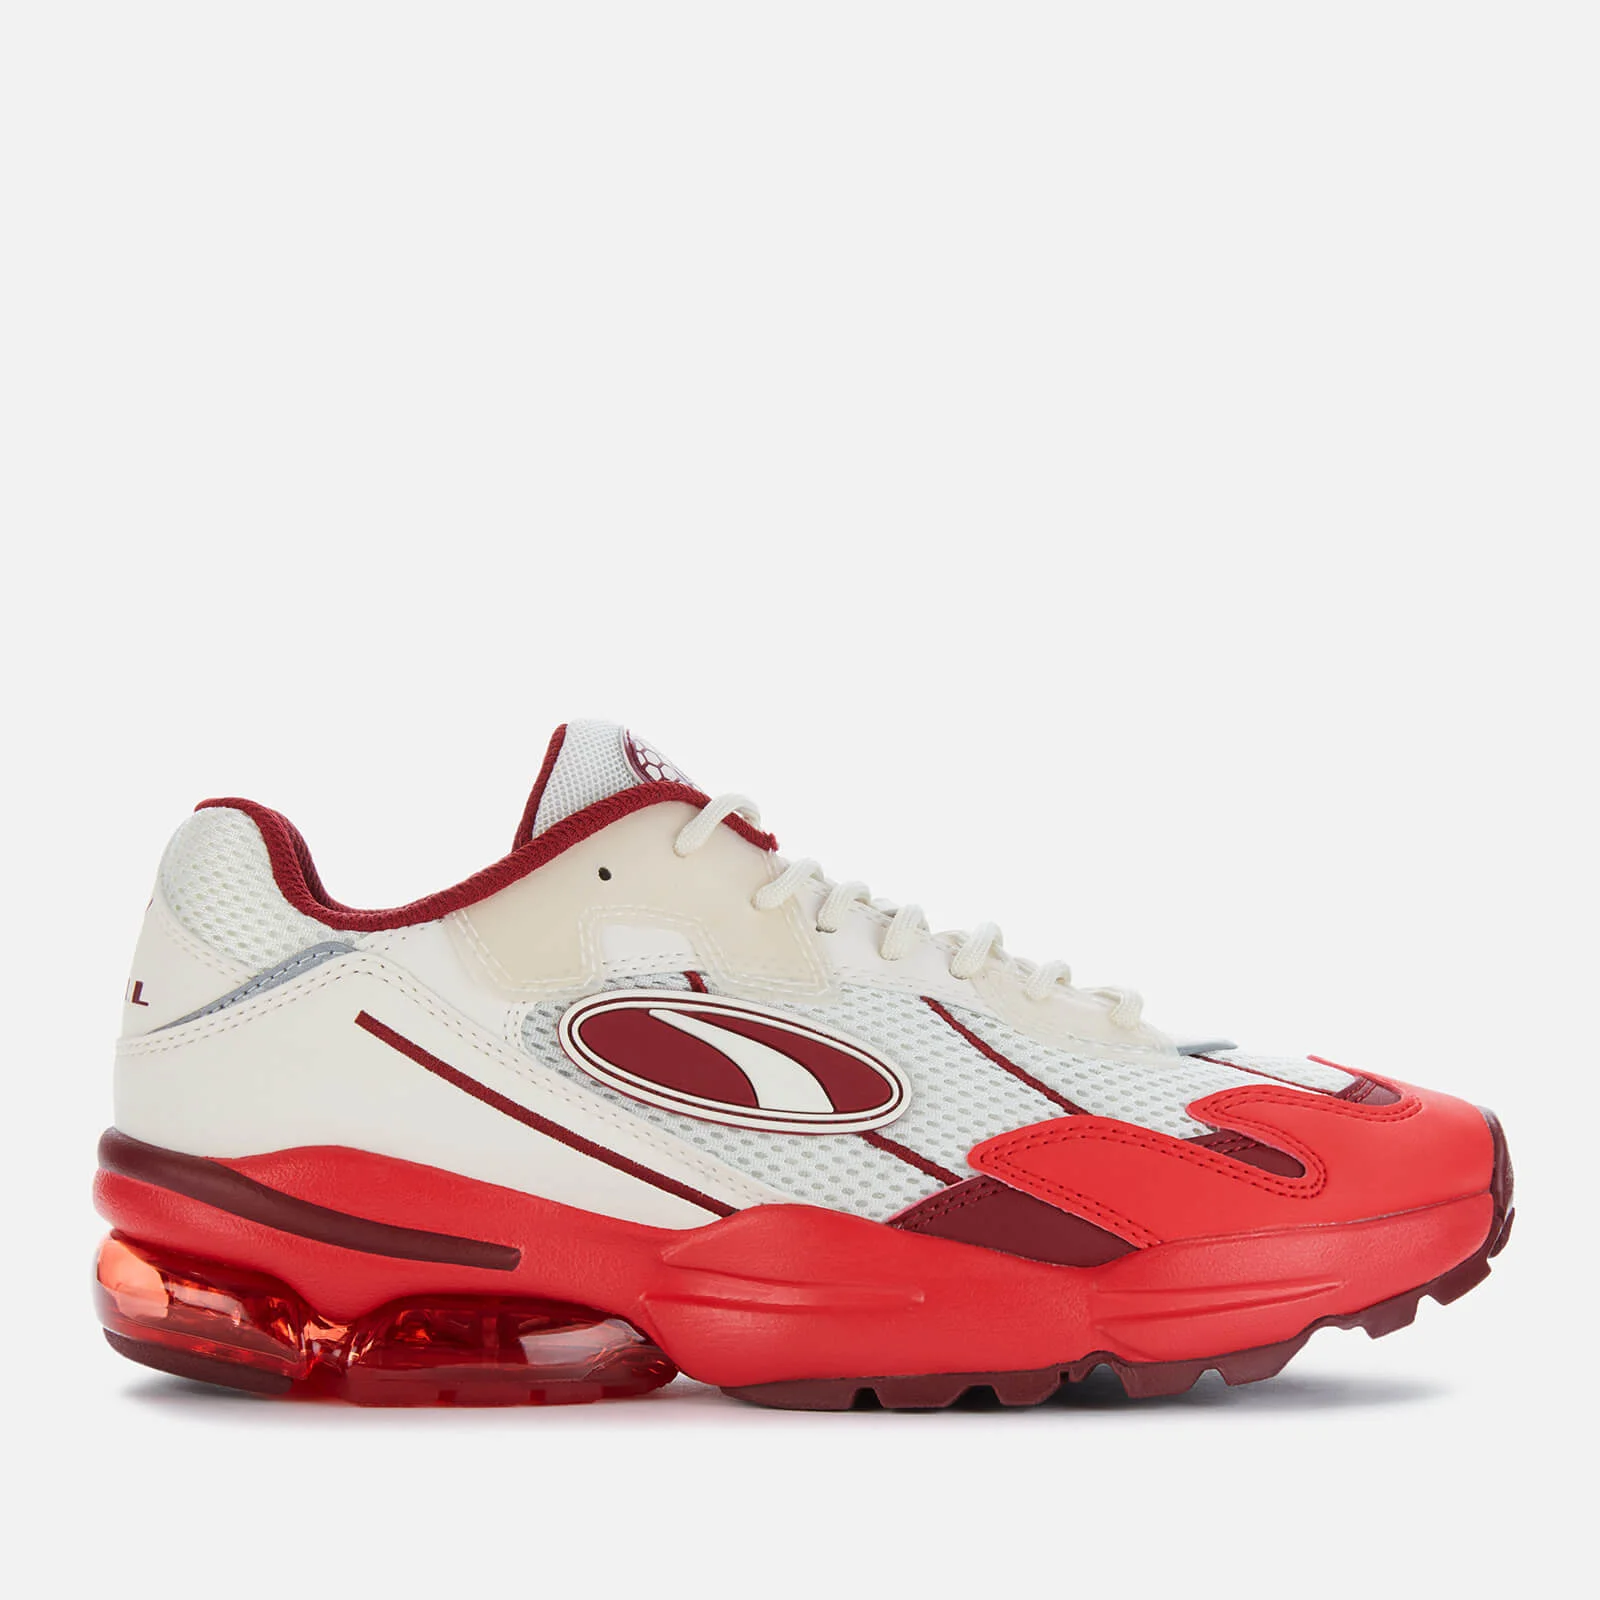 Puma Men's Cell Ultra Medical Trainers - Whisper White/High Risk Red Image 1